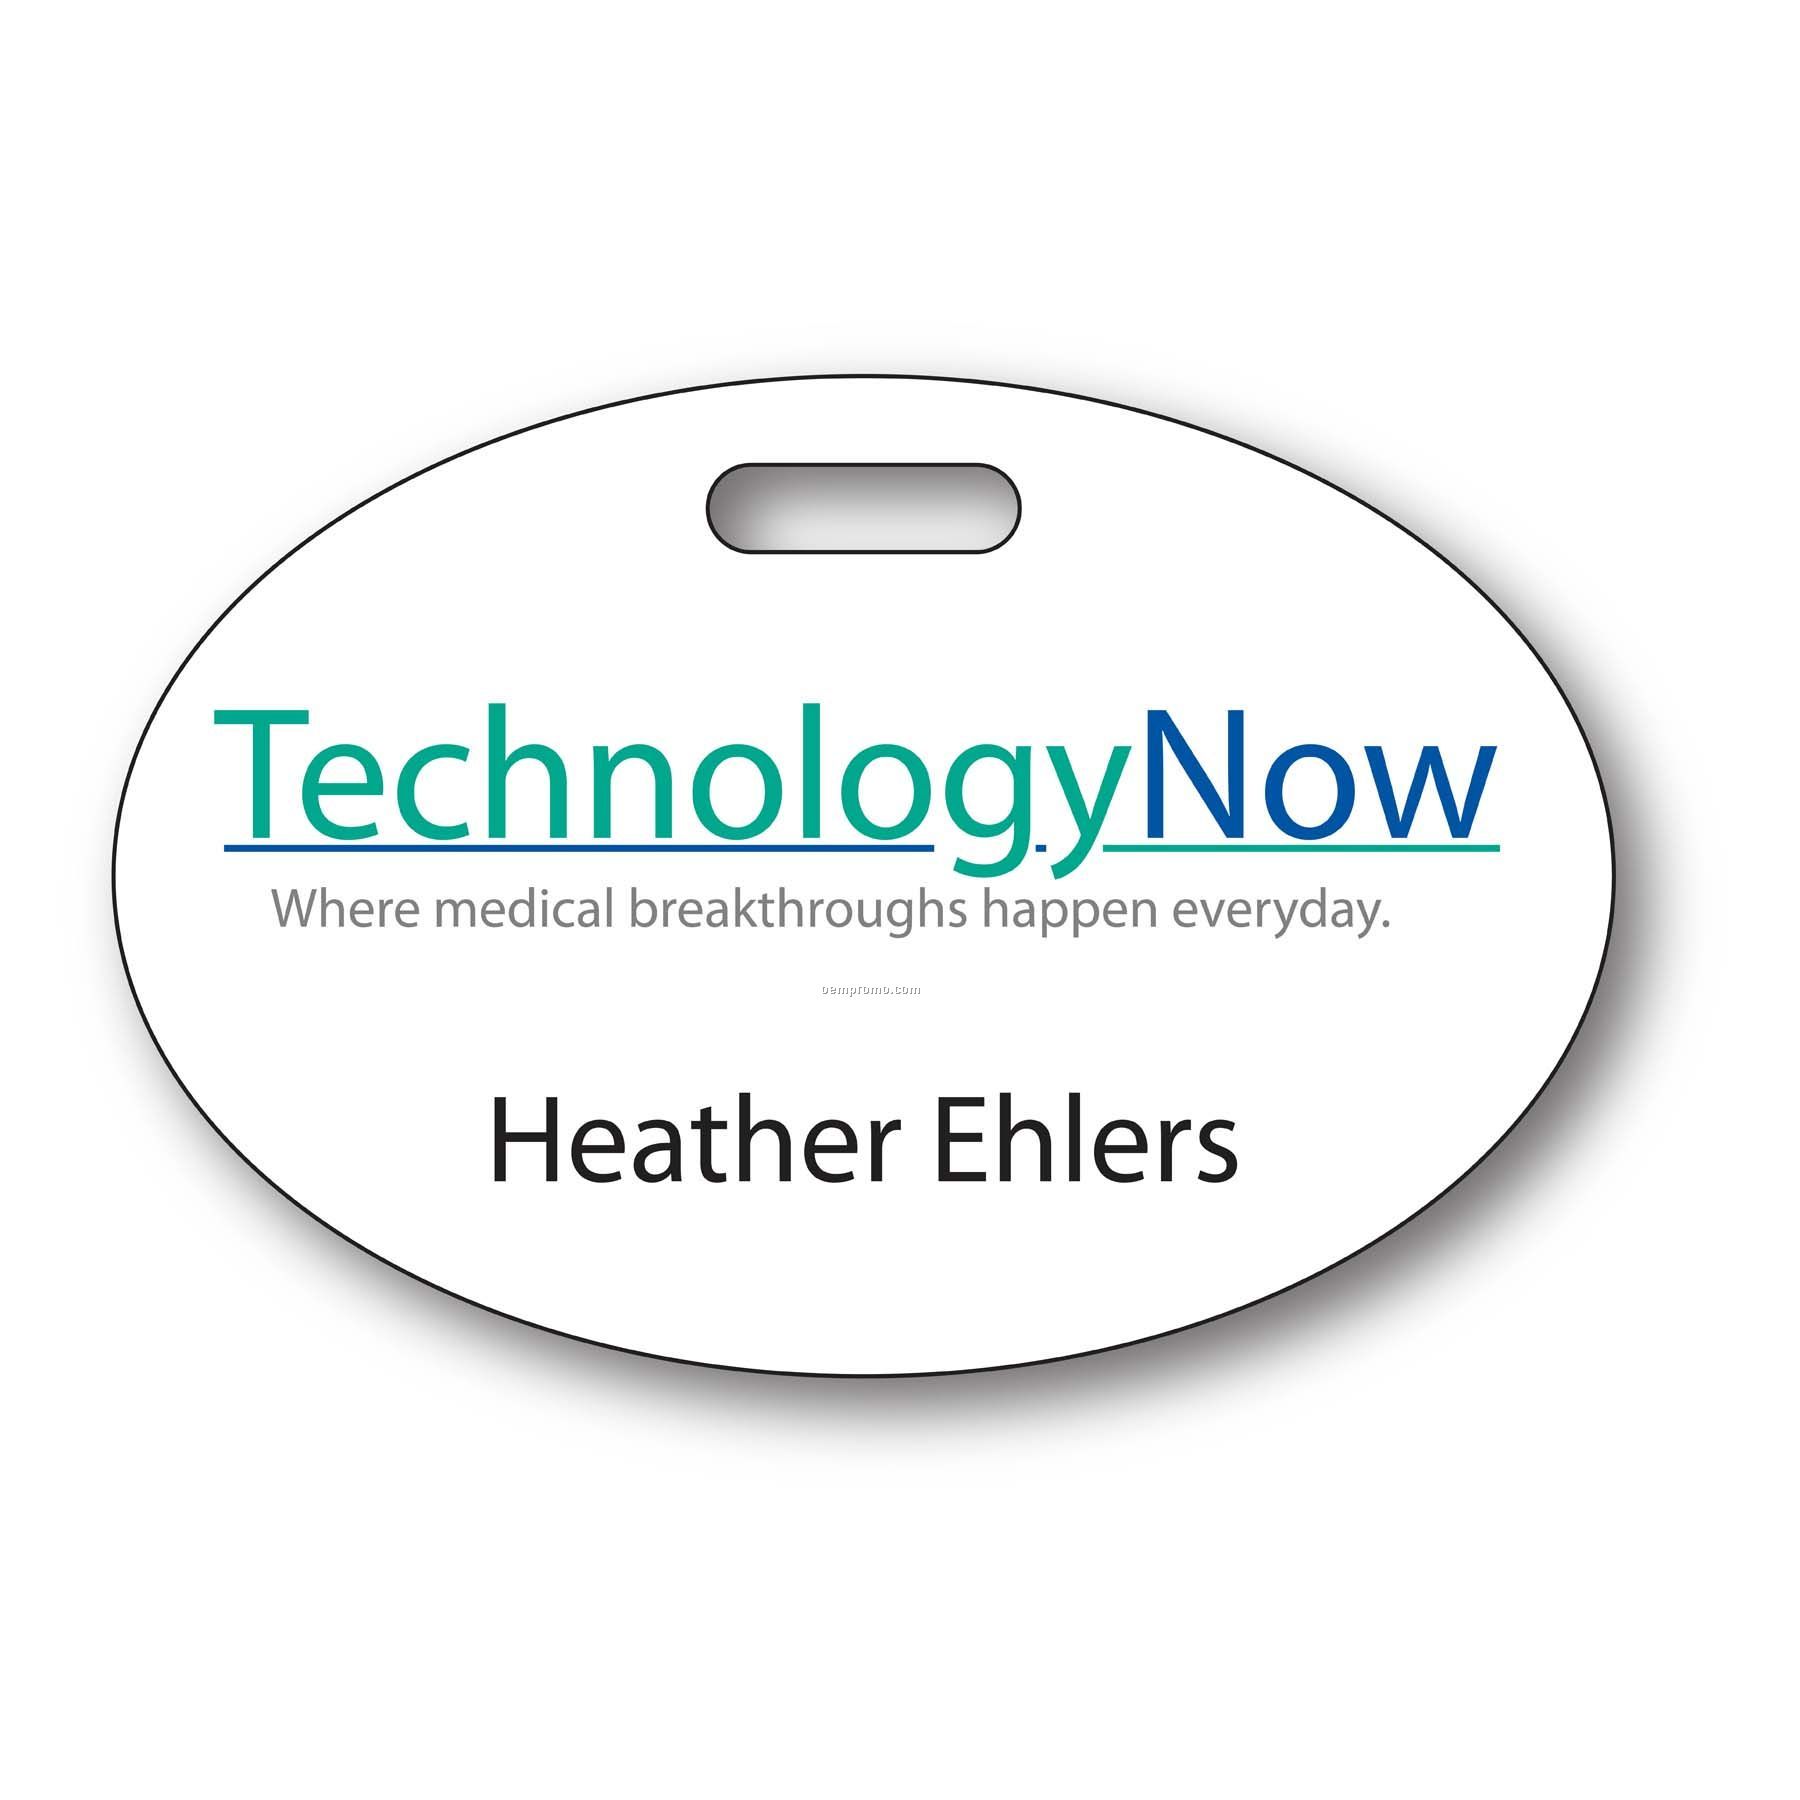 2" X 3" Oval Clip-on Name Badge